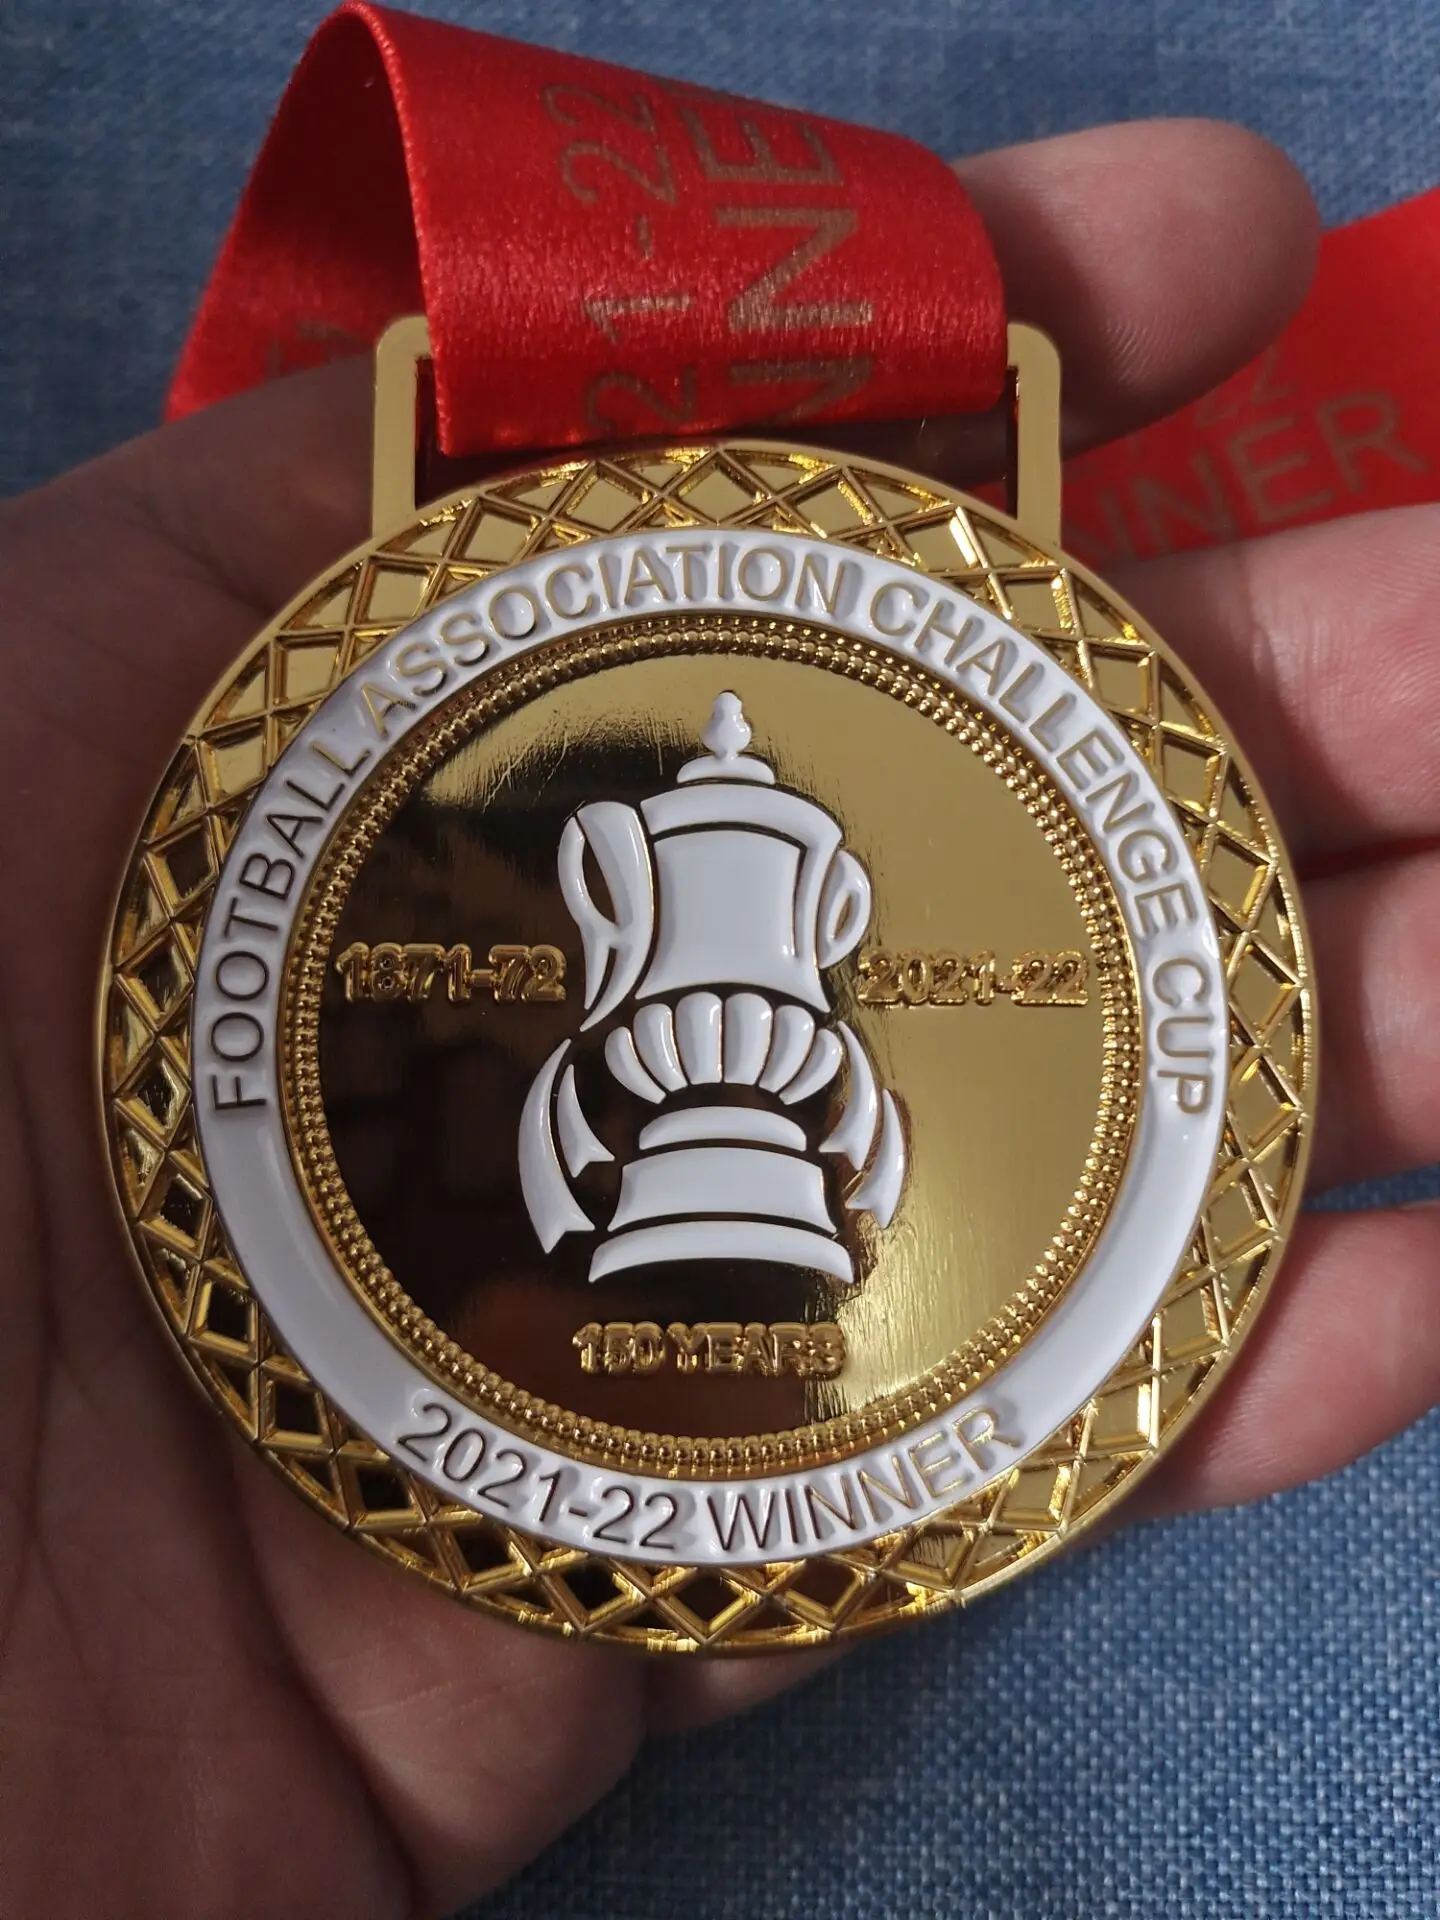 

hot sale The 2021-22 Season The FA Cup Champions Medals The Football Association Challenge Cup Medals Champion Medal Fan Souveni